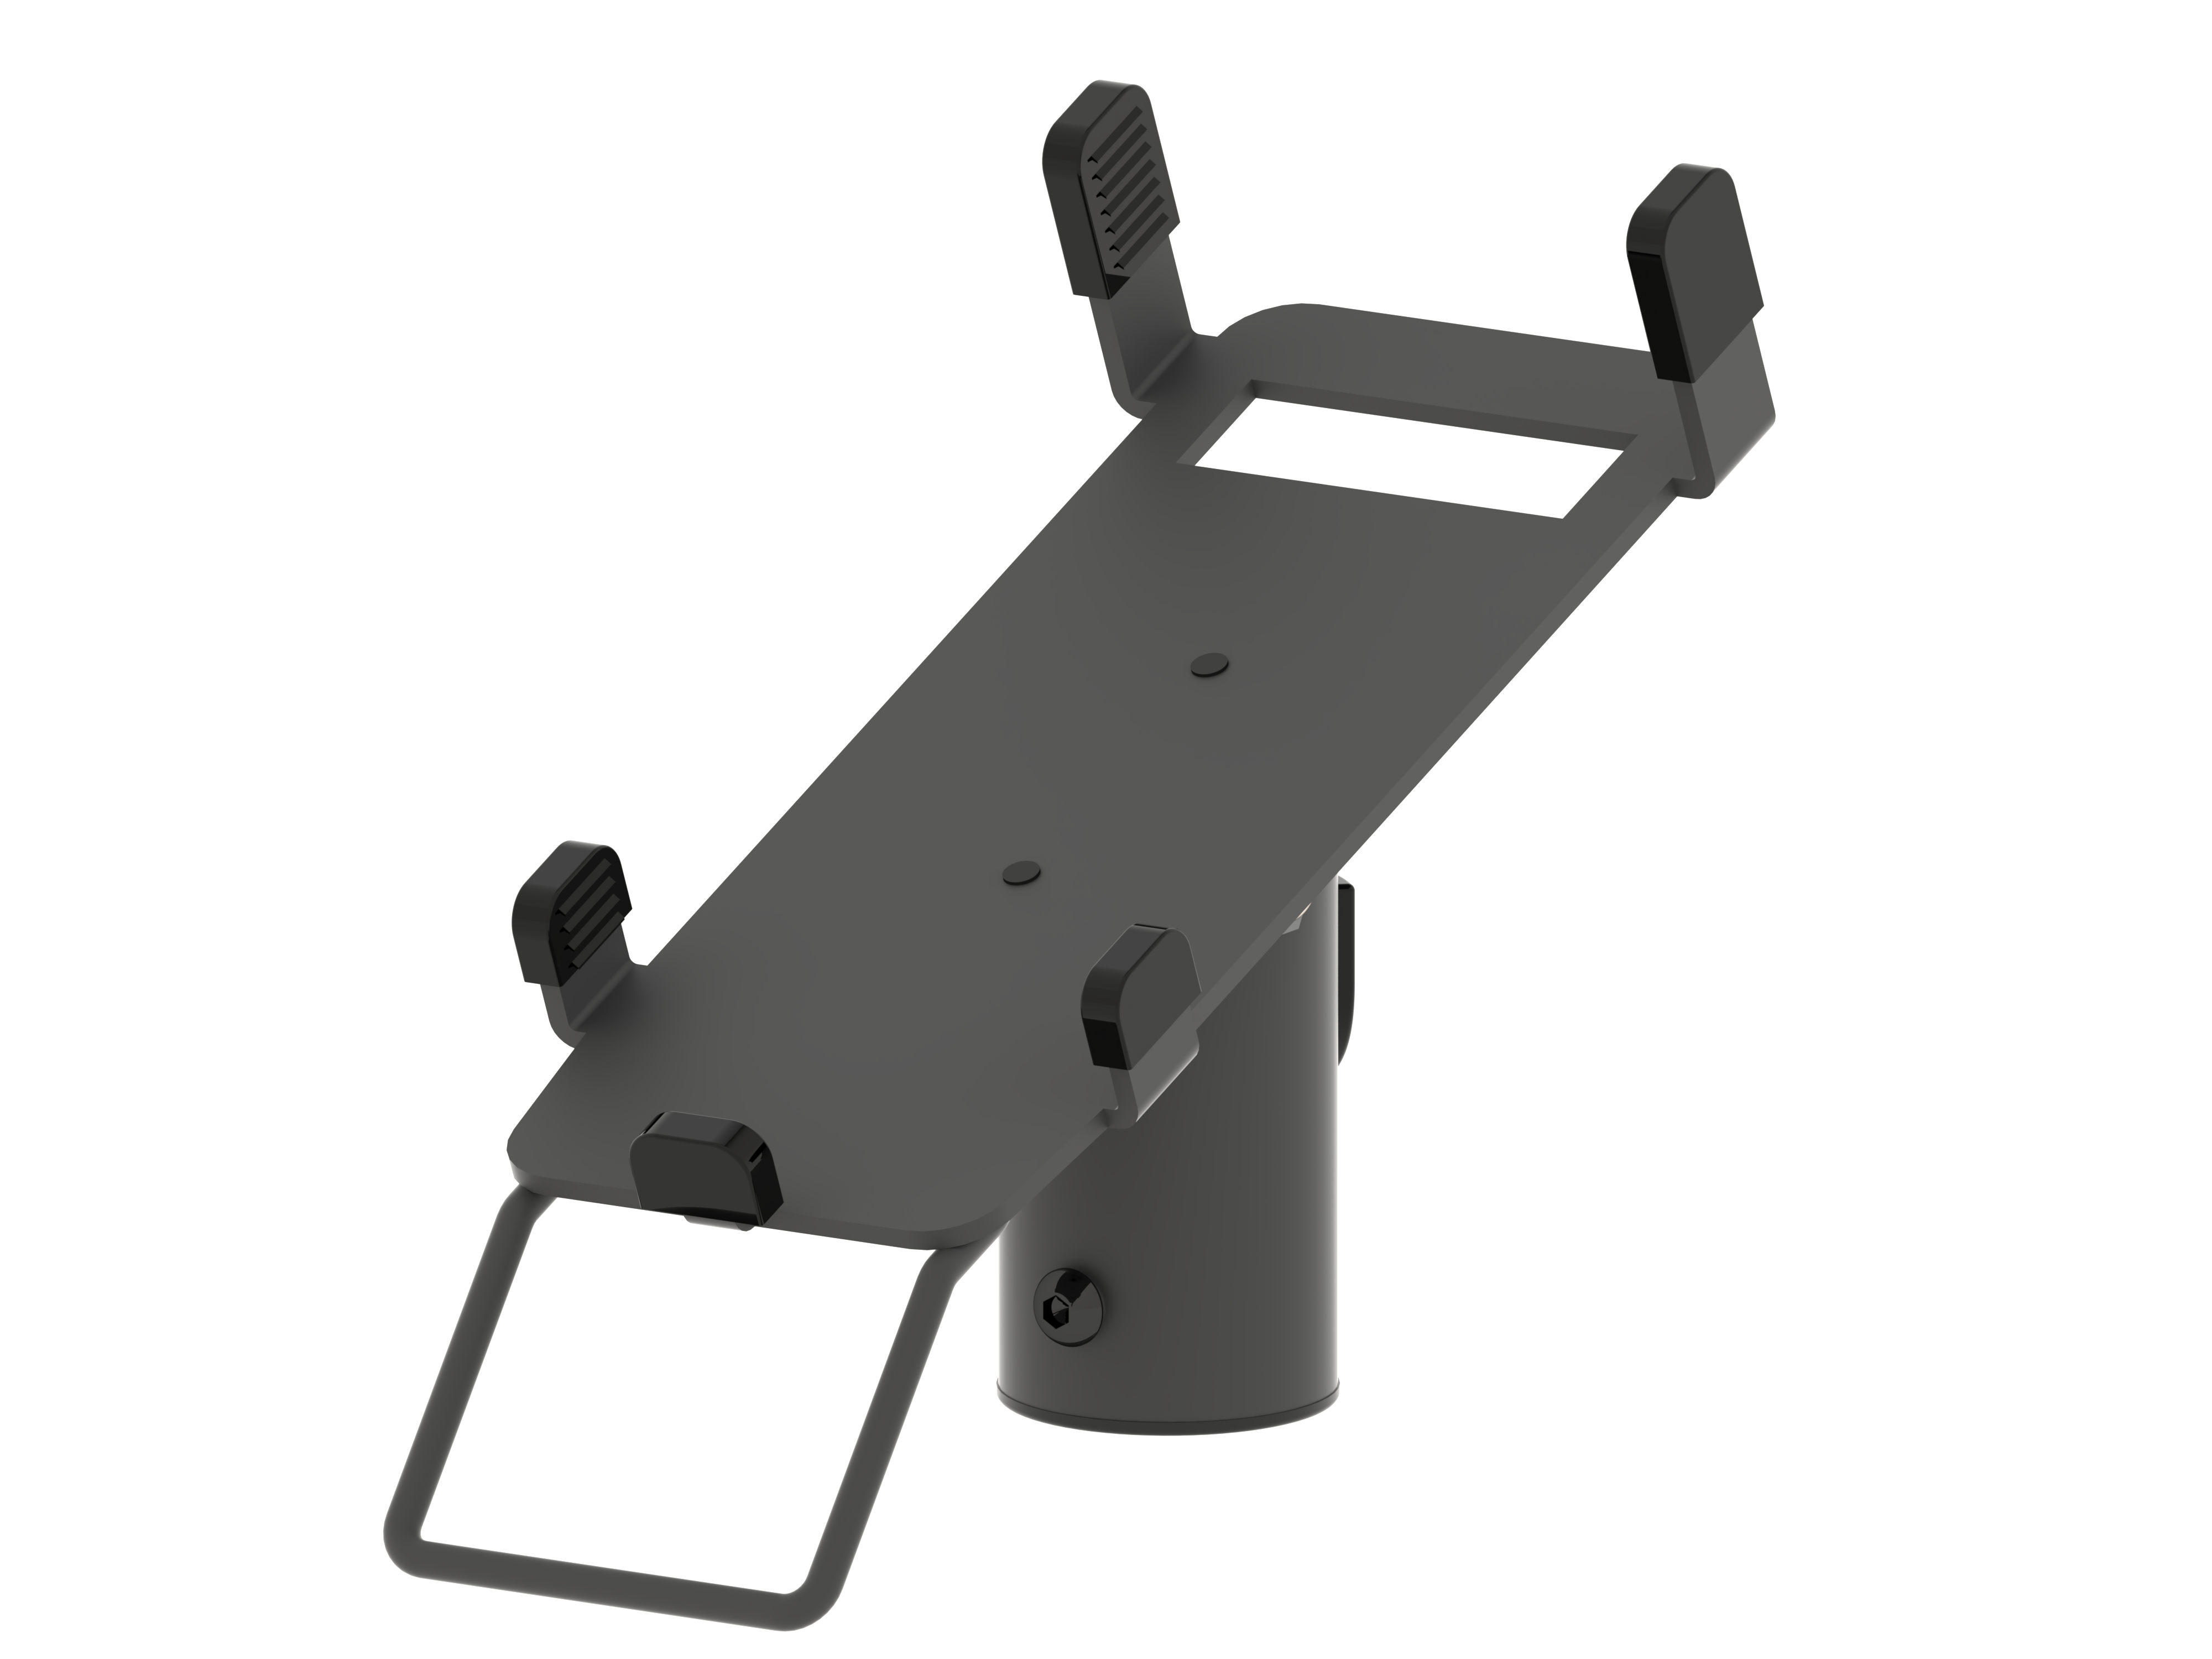 Steel stand for pin pad SUNMI P200 PRO